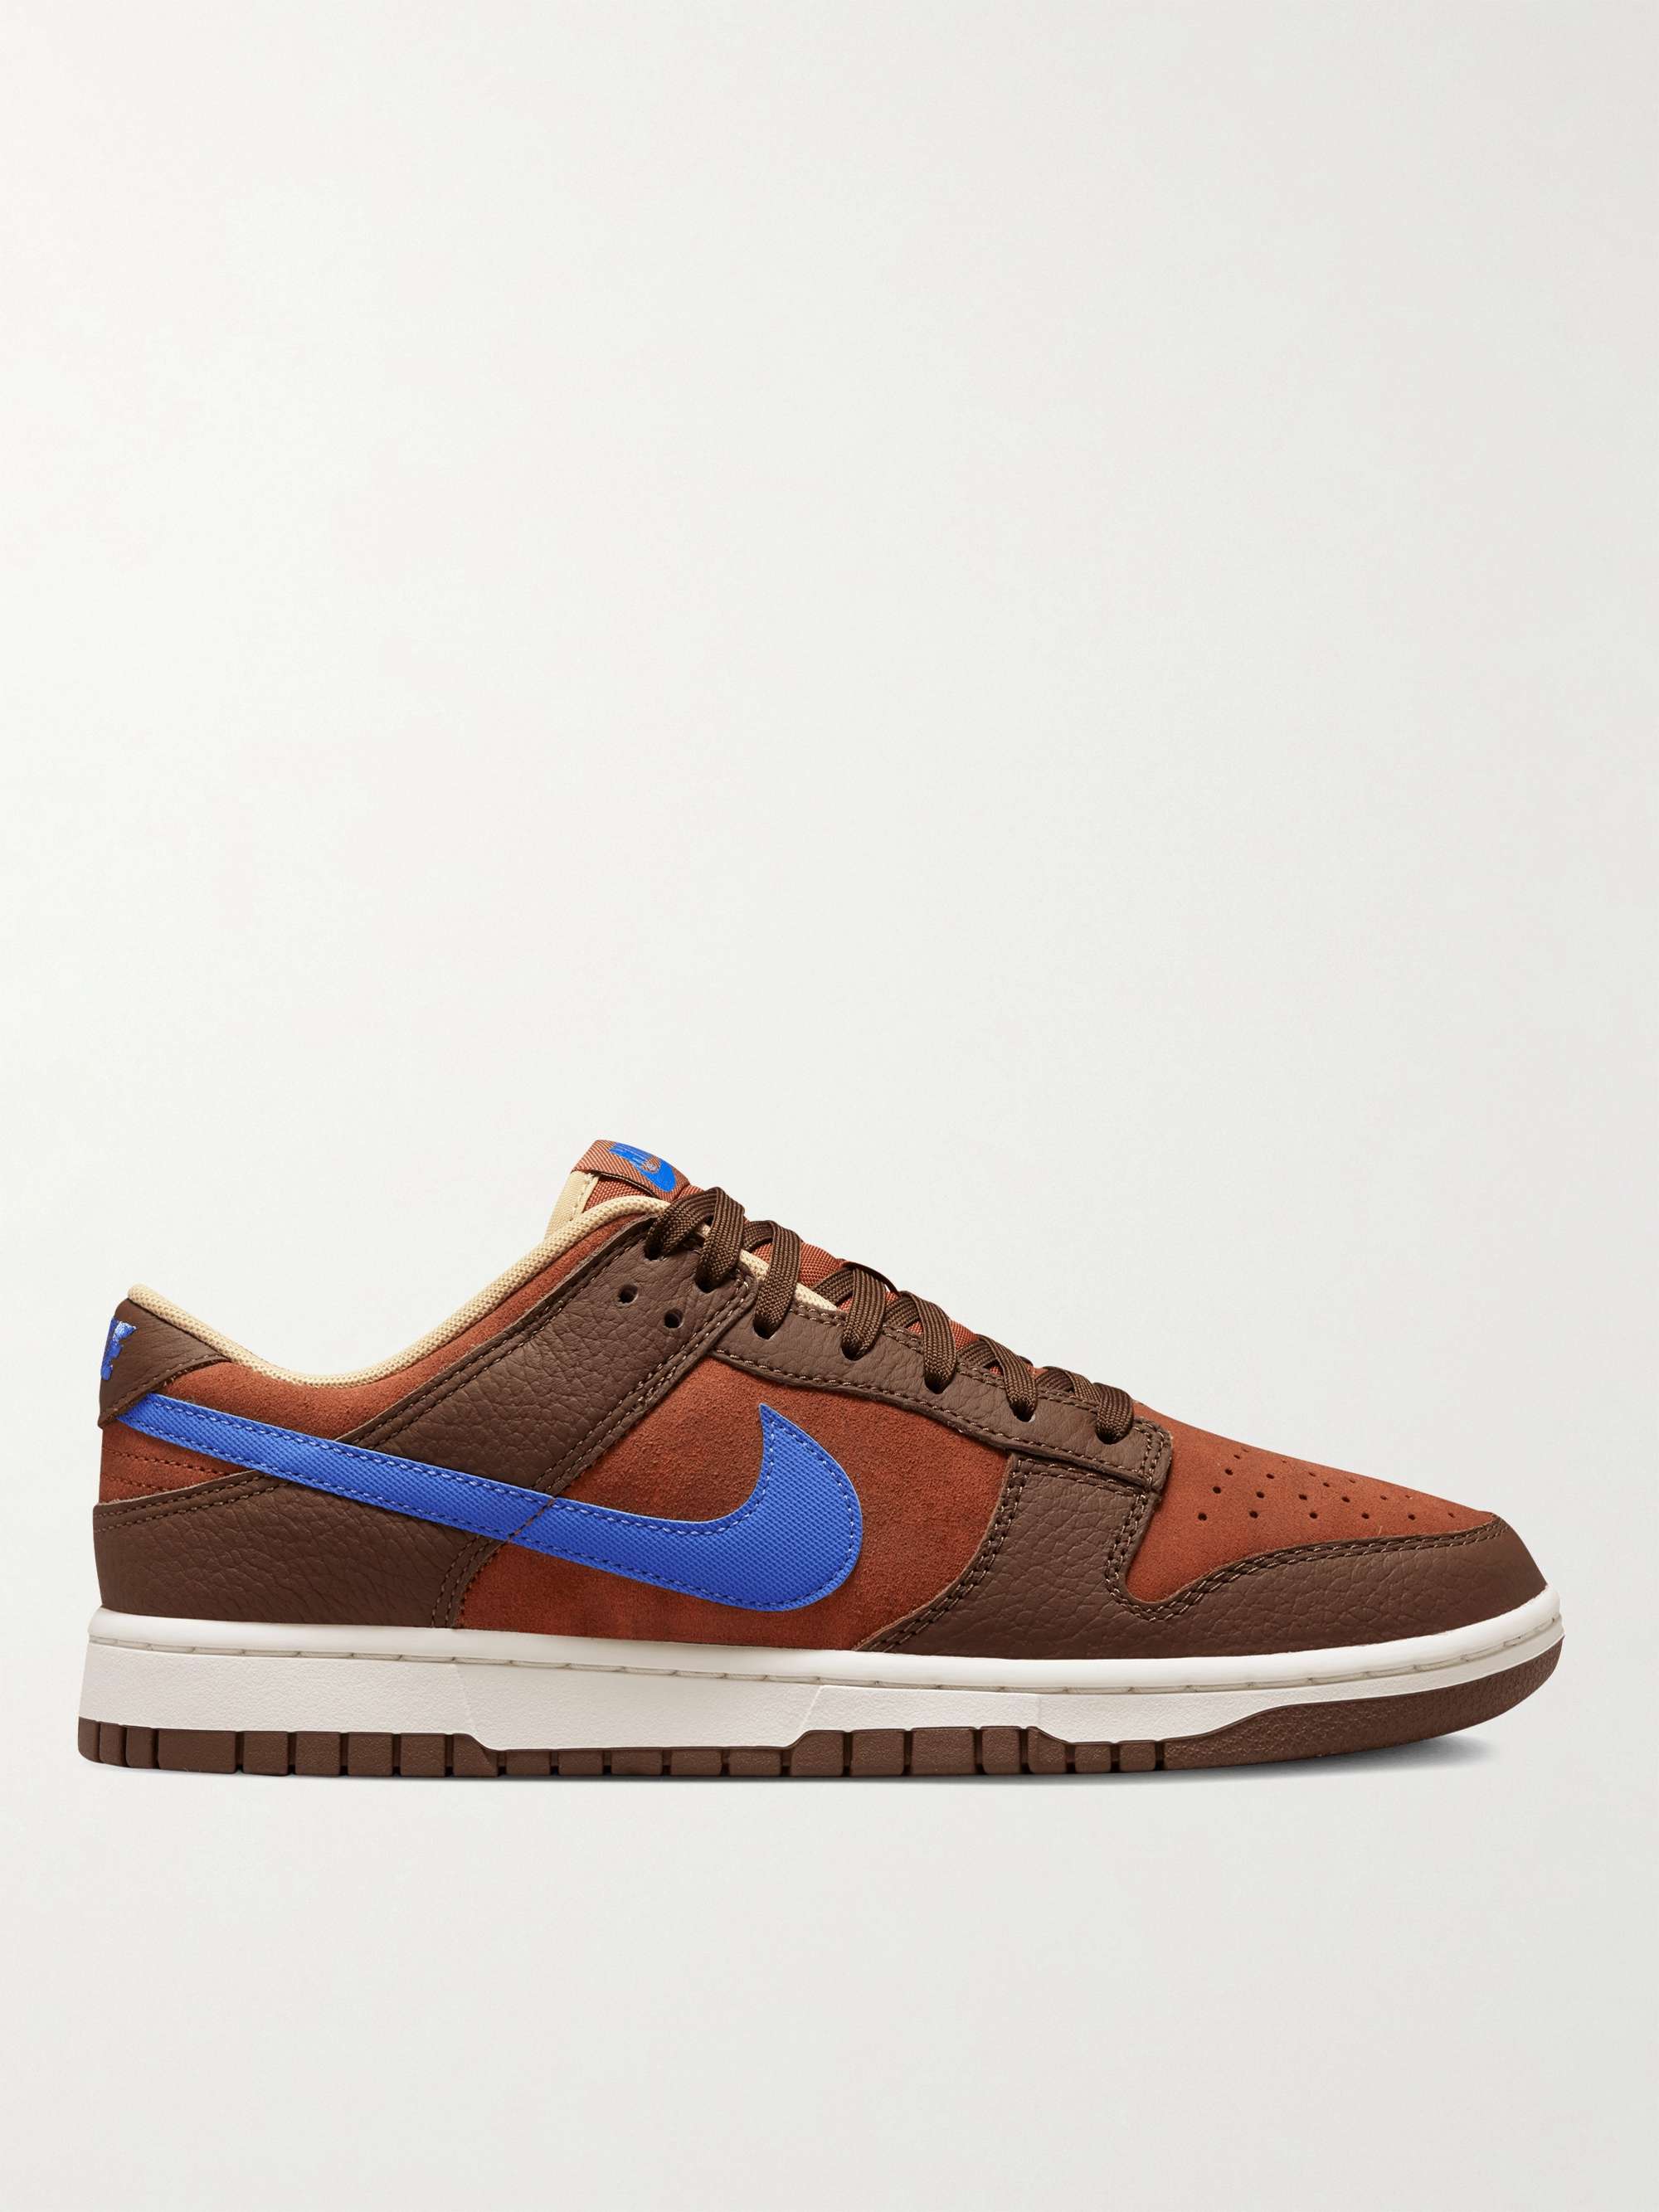 Brown Dunk Low Retro Leather-Trimmed Suede Sneakers | NIKE | MR PORTER